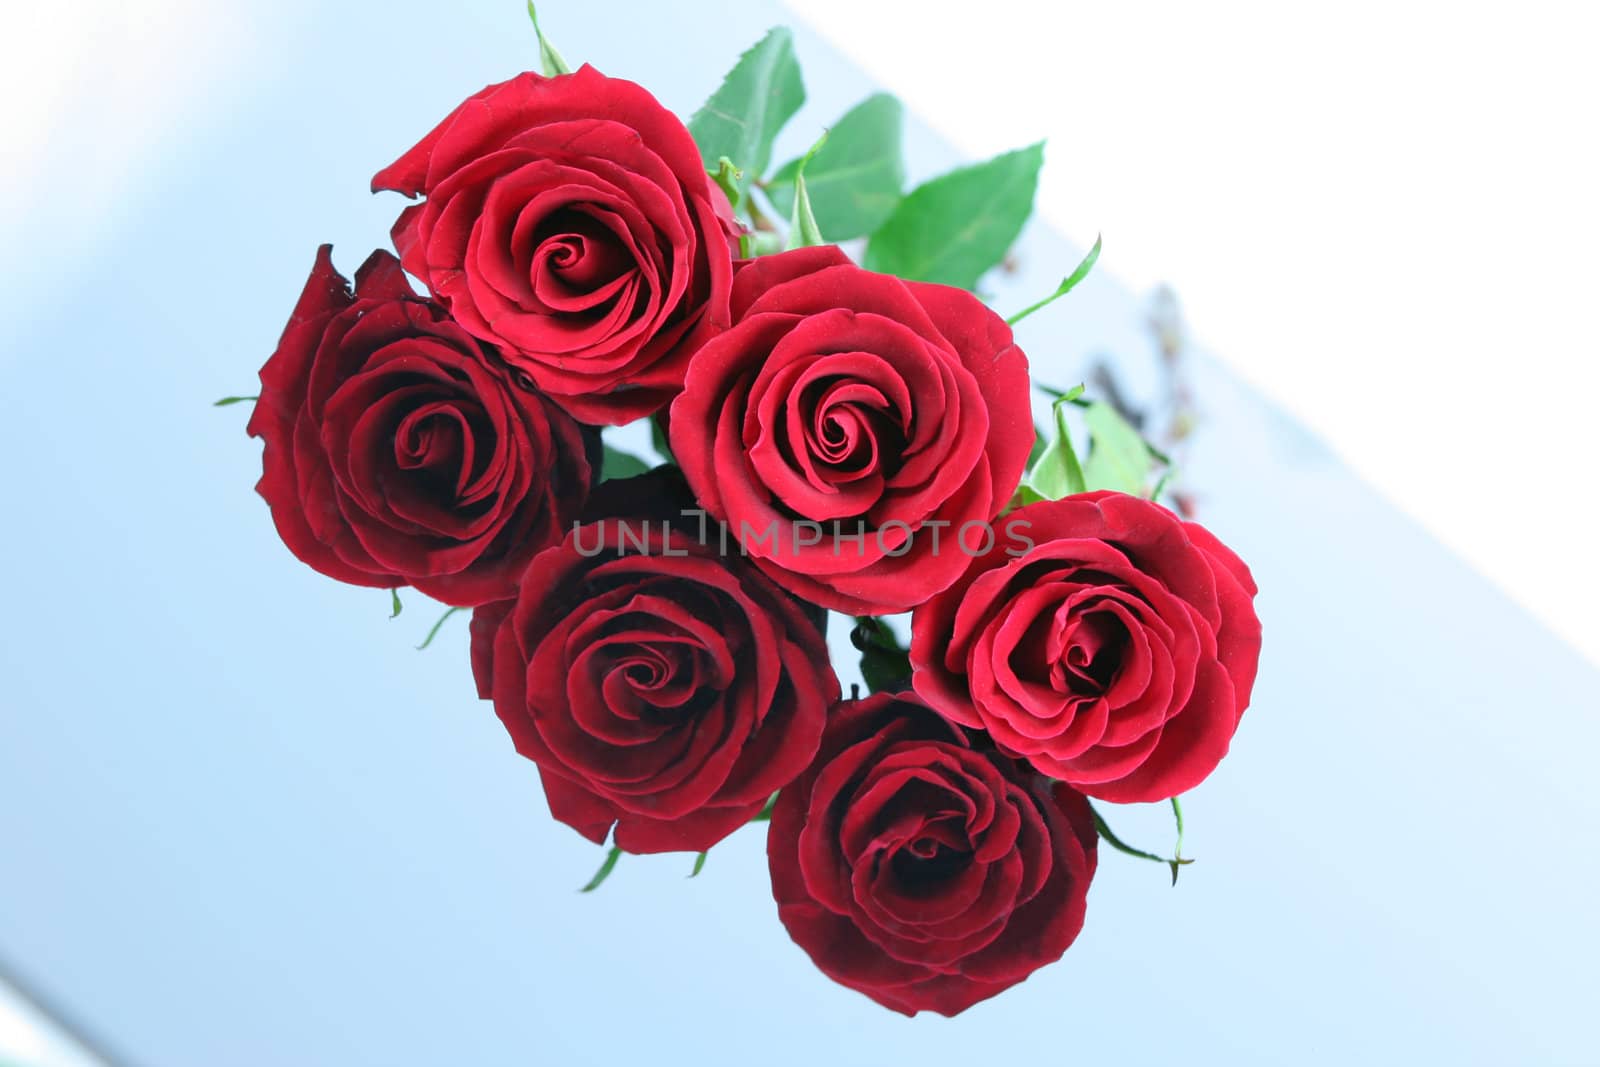 Three red roses isolated on reflective surface.